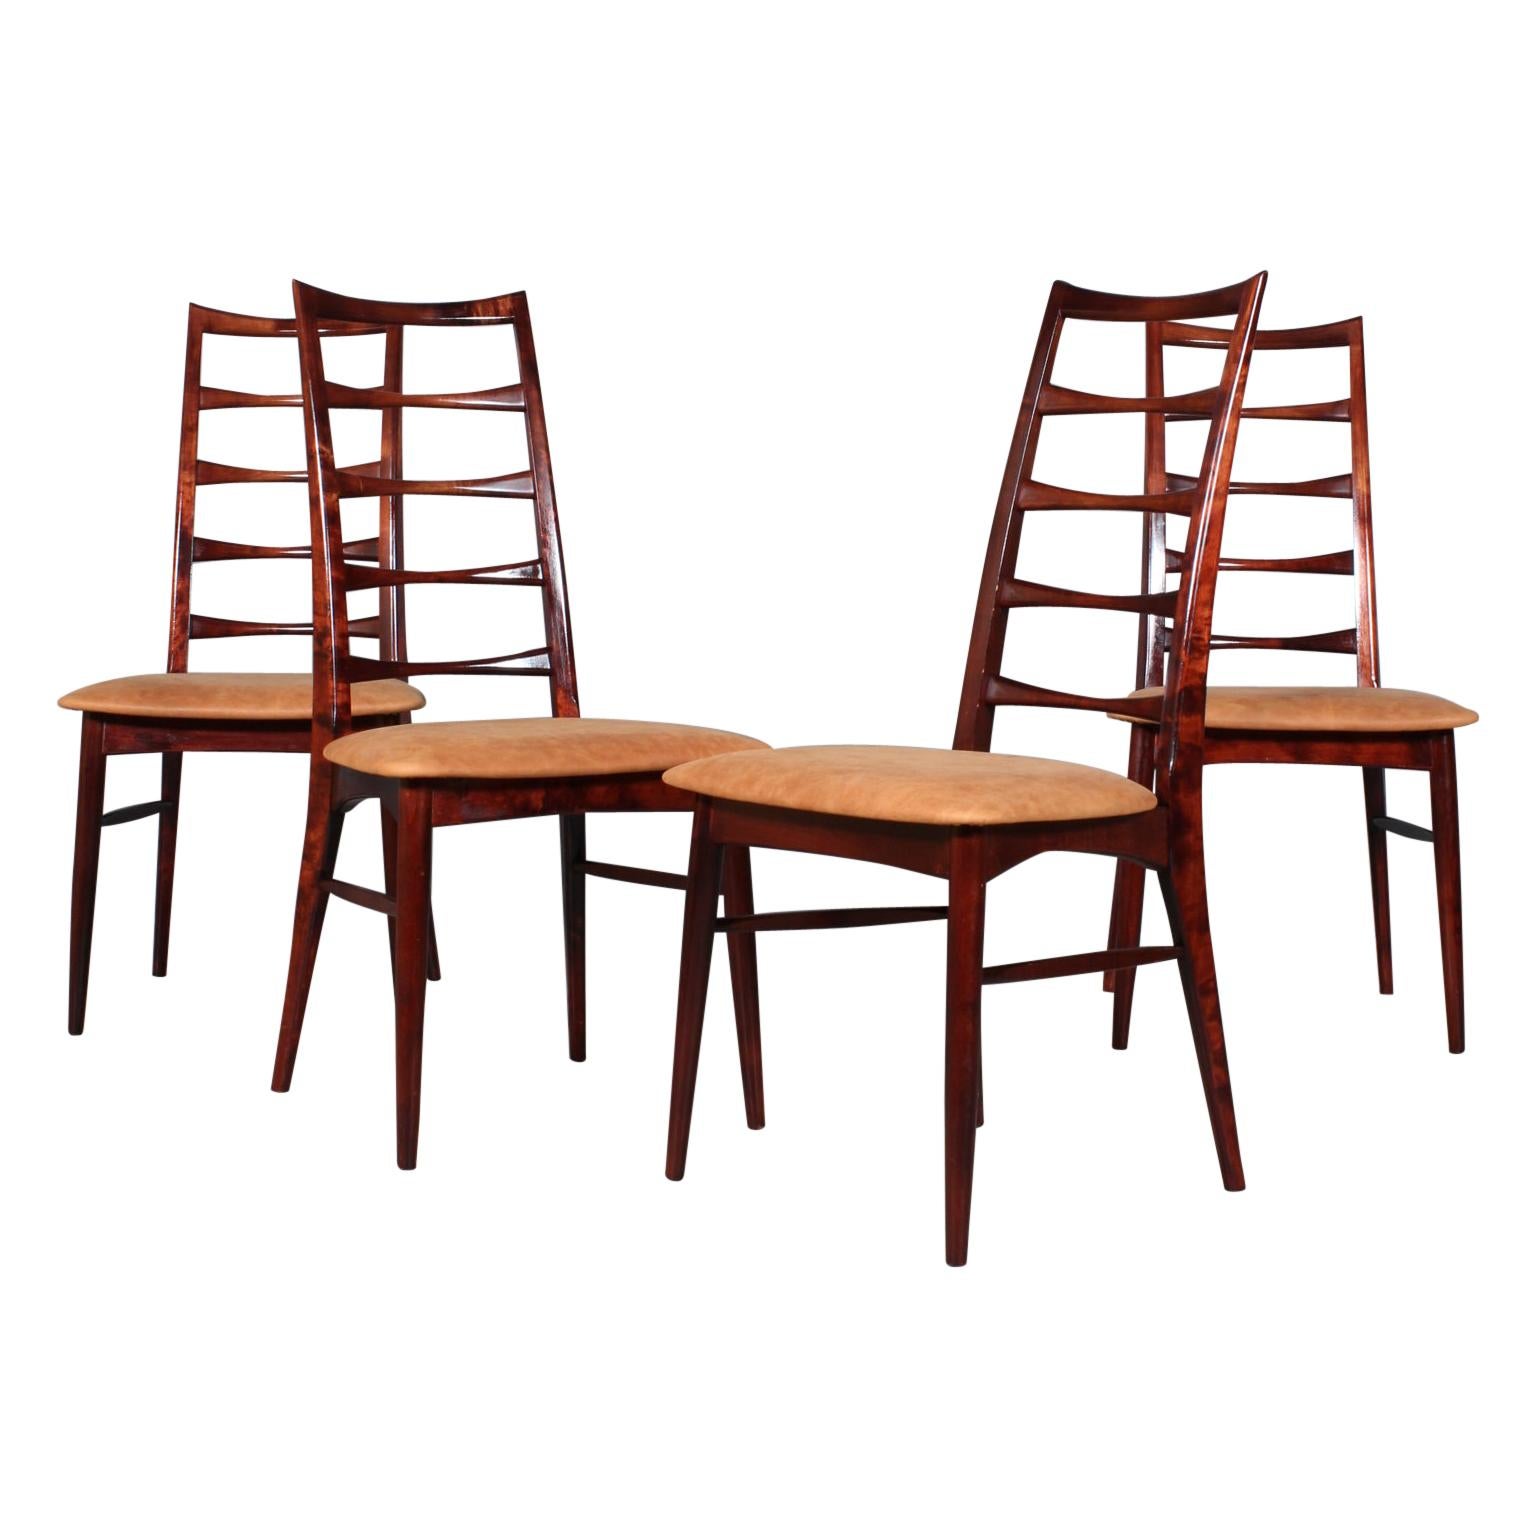 Four Niels Koefoed Dining Chairs, Model "Lis"